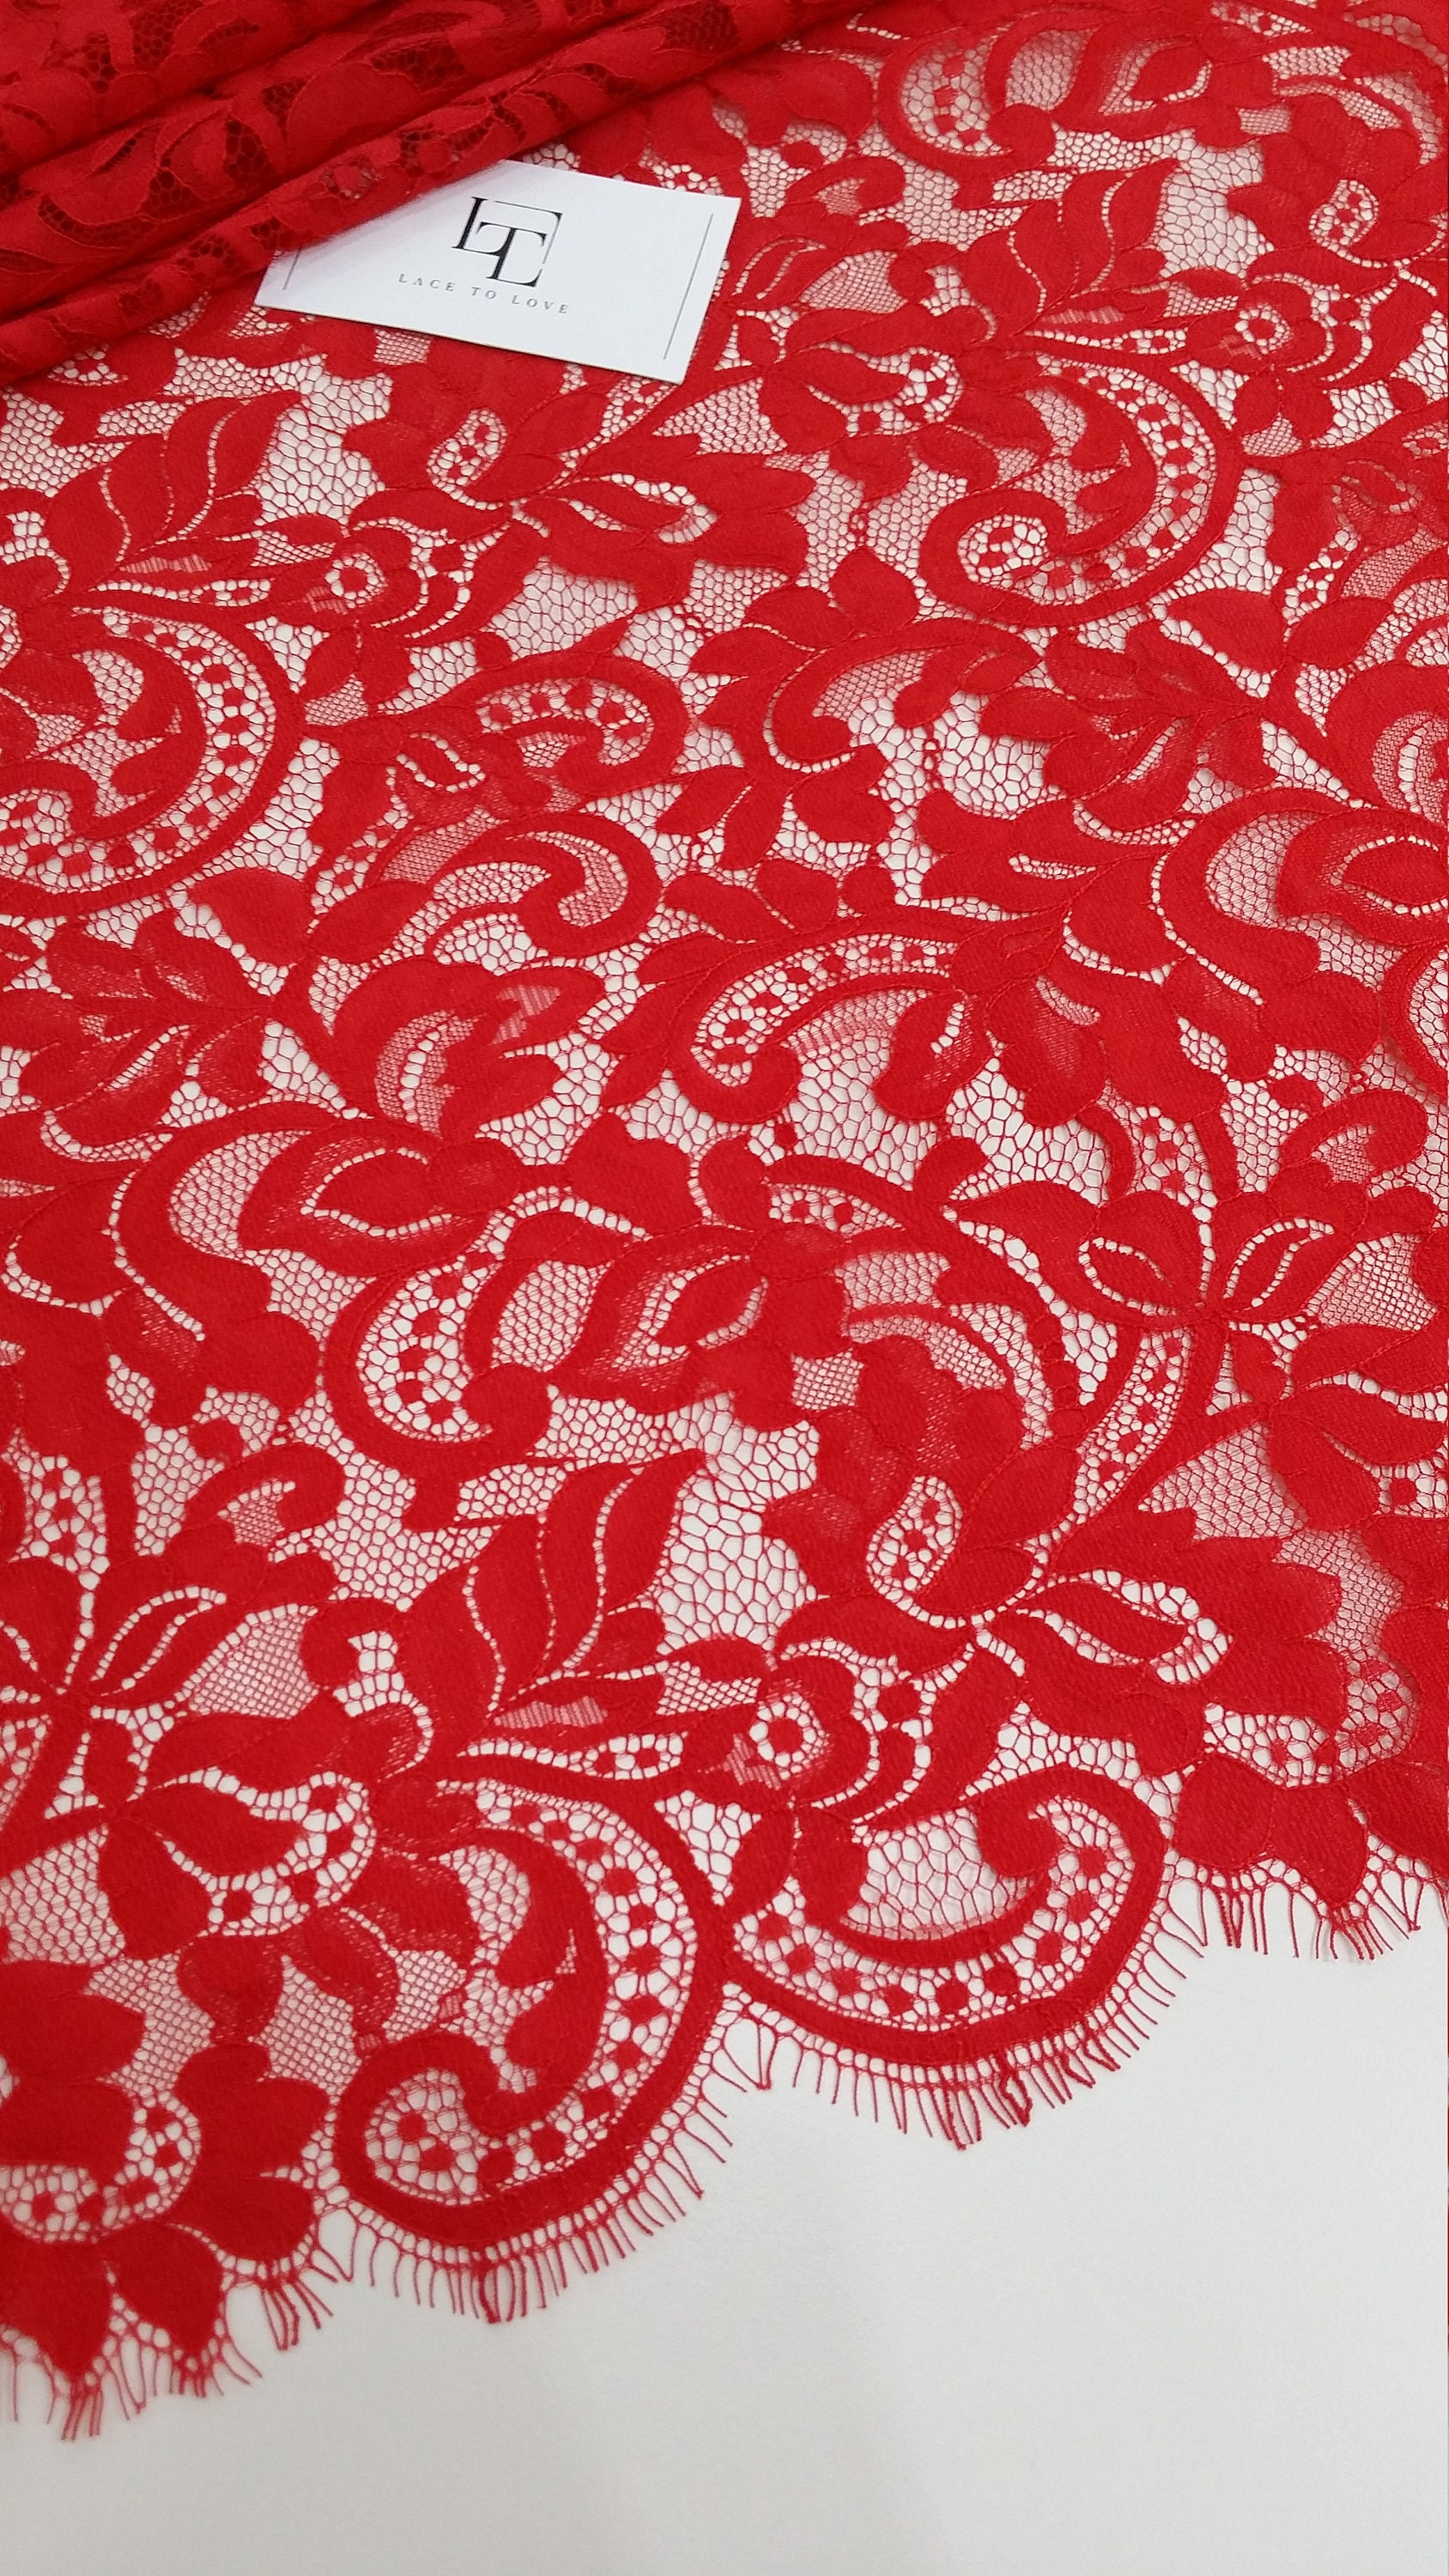 Red Lace Fabric French Lace Chantilly Lace Wedding Lace - Etsy